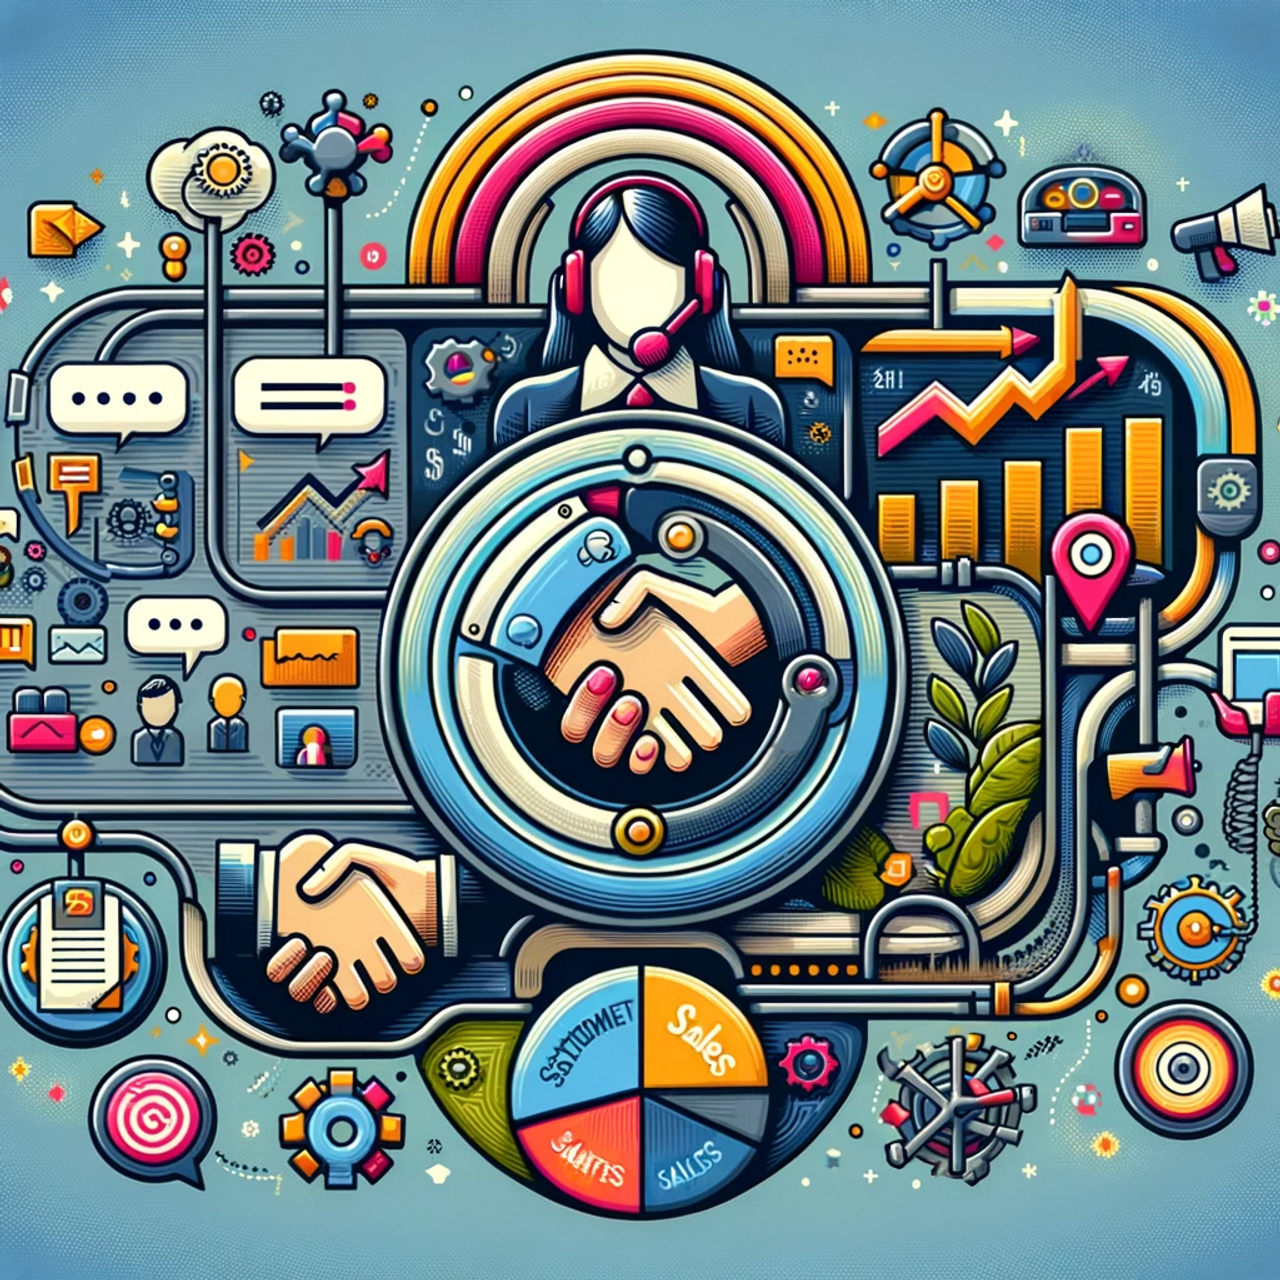 DALL·E 2023-12-11 09.38.51 - A detailed and colorful illustration showing the features of a CRM system for customer support, sales, and marketing teams. The image is divided into .png